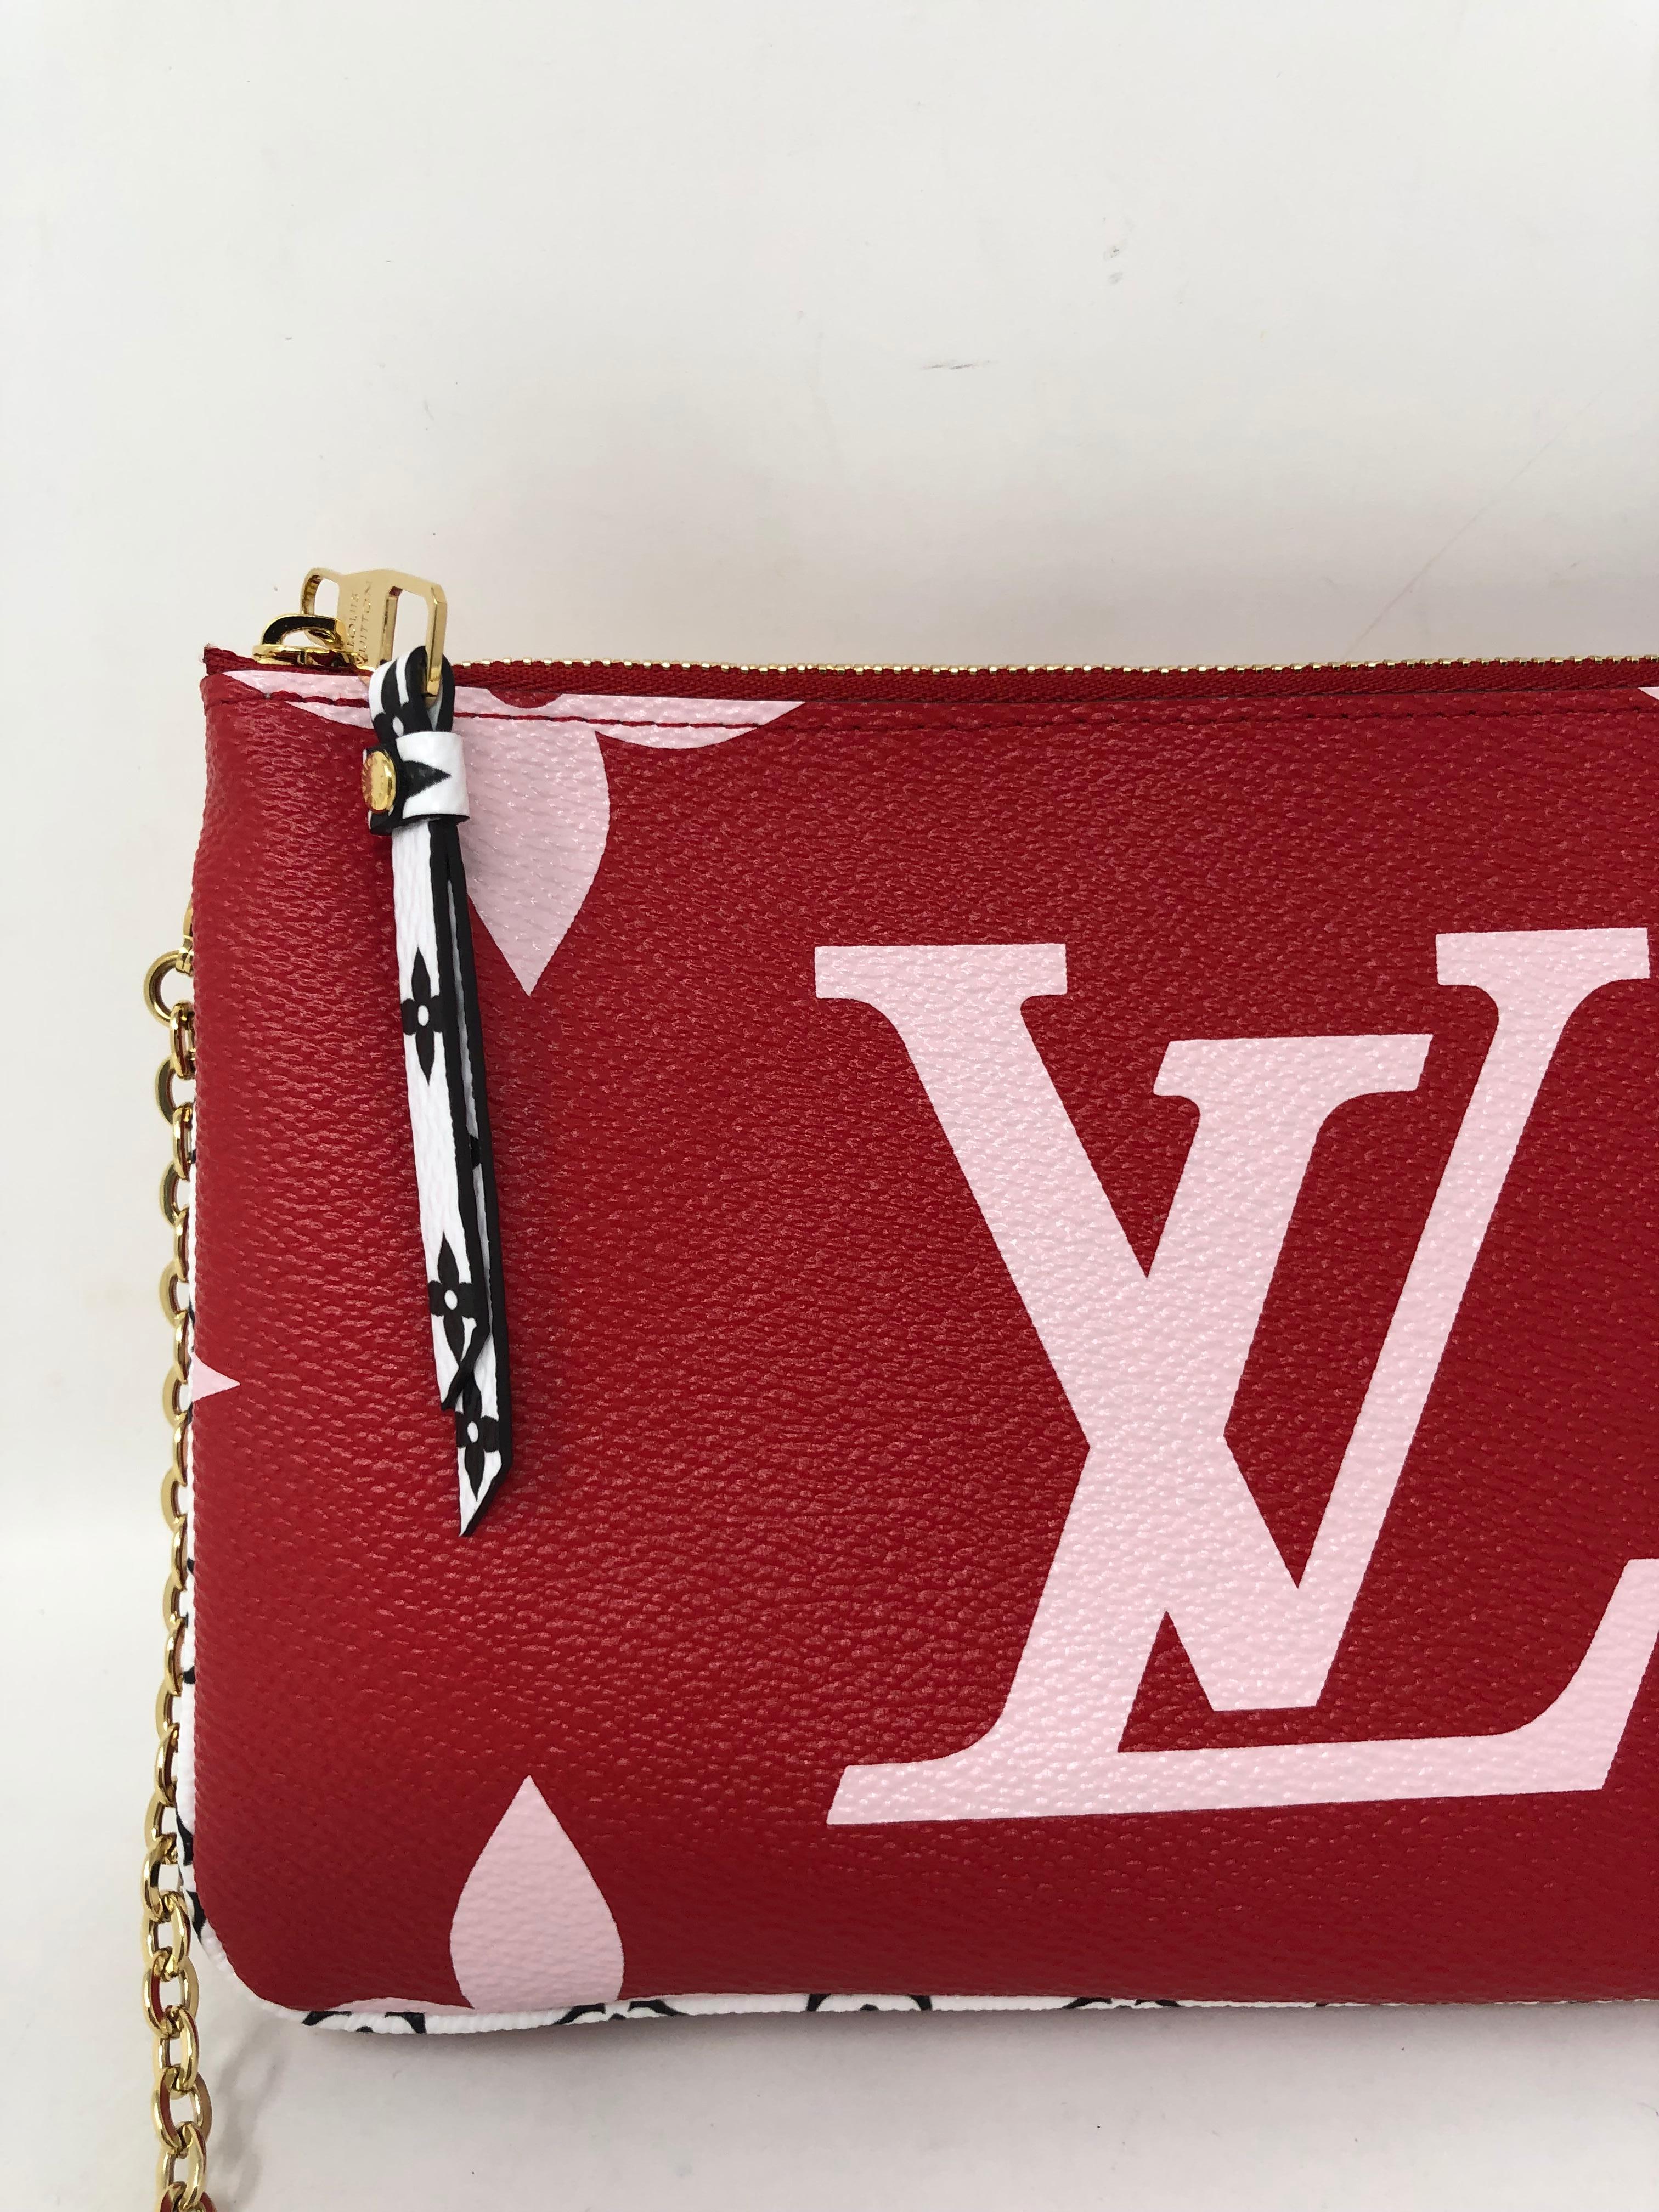 Louis Vuitton Pochette Double Zip Mono Giant in Red/ Pink. Brand new. Limited and rare. Can be worn as a shoulder bag with gold chain or as a clutch. Double zips each side. Can be worn as a wallet on a chain too. Includes dust cover and box.